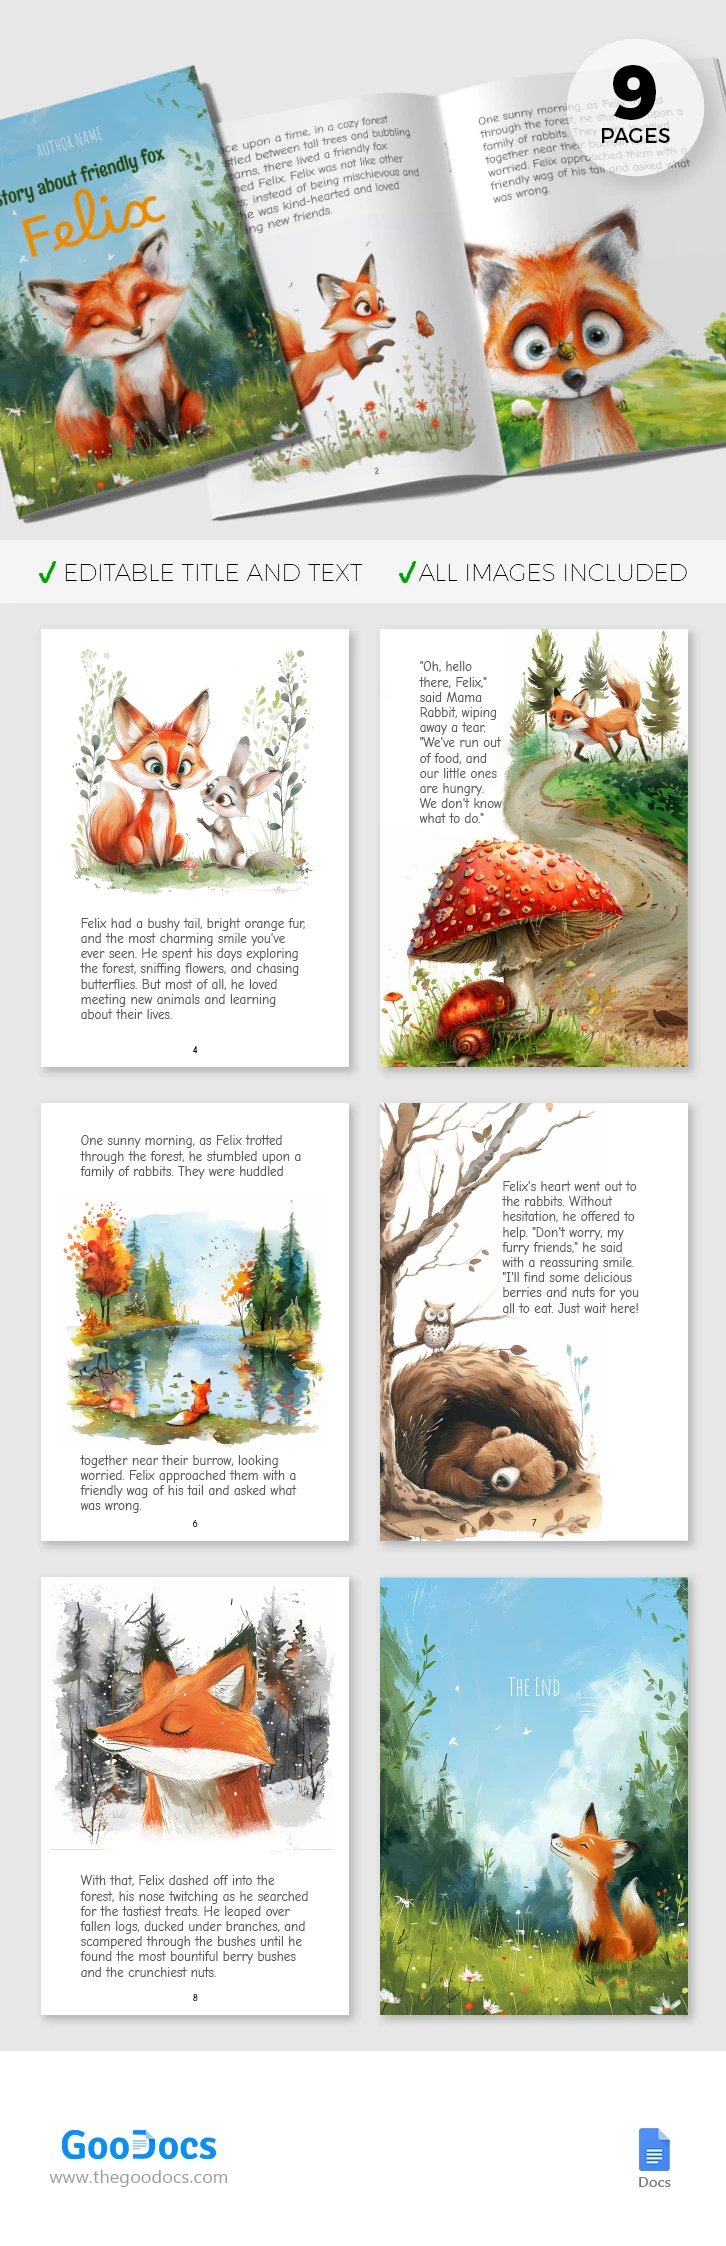 Illustrated Children's Book - free Google Docs Template - 10068498